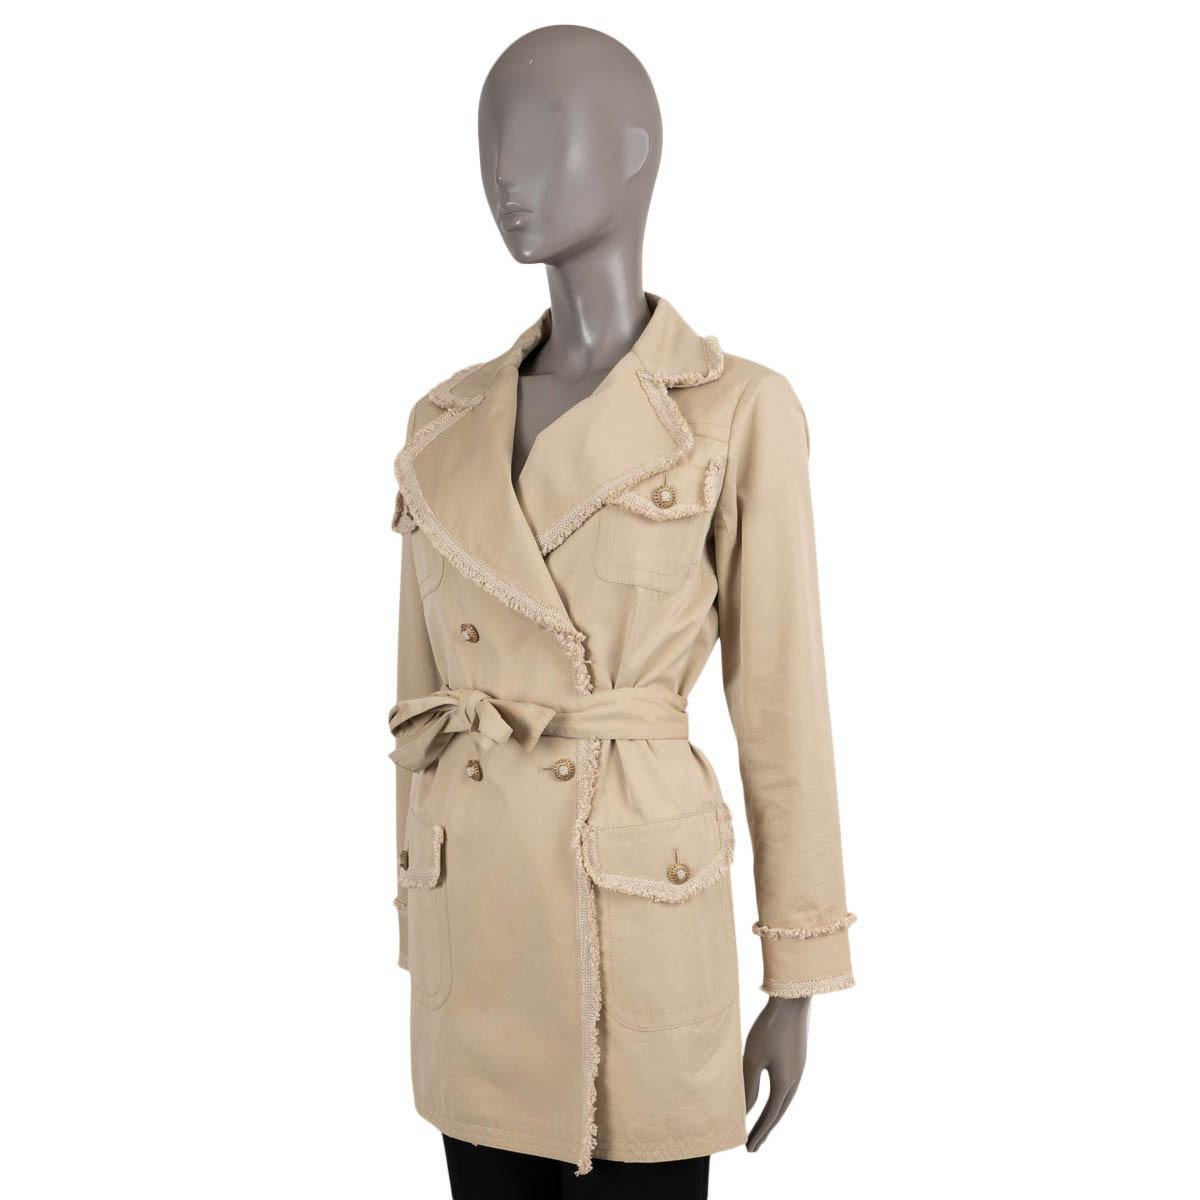 100% authentic Chanel trench coat in beige cotton (70%) and silk (30%). Features frayed tweed trims, peak lapels and four buttoned flap pockets. Closes with a double row of buttons and matching self-tie belt and is unlined. Has been worn and is in